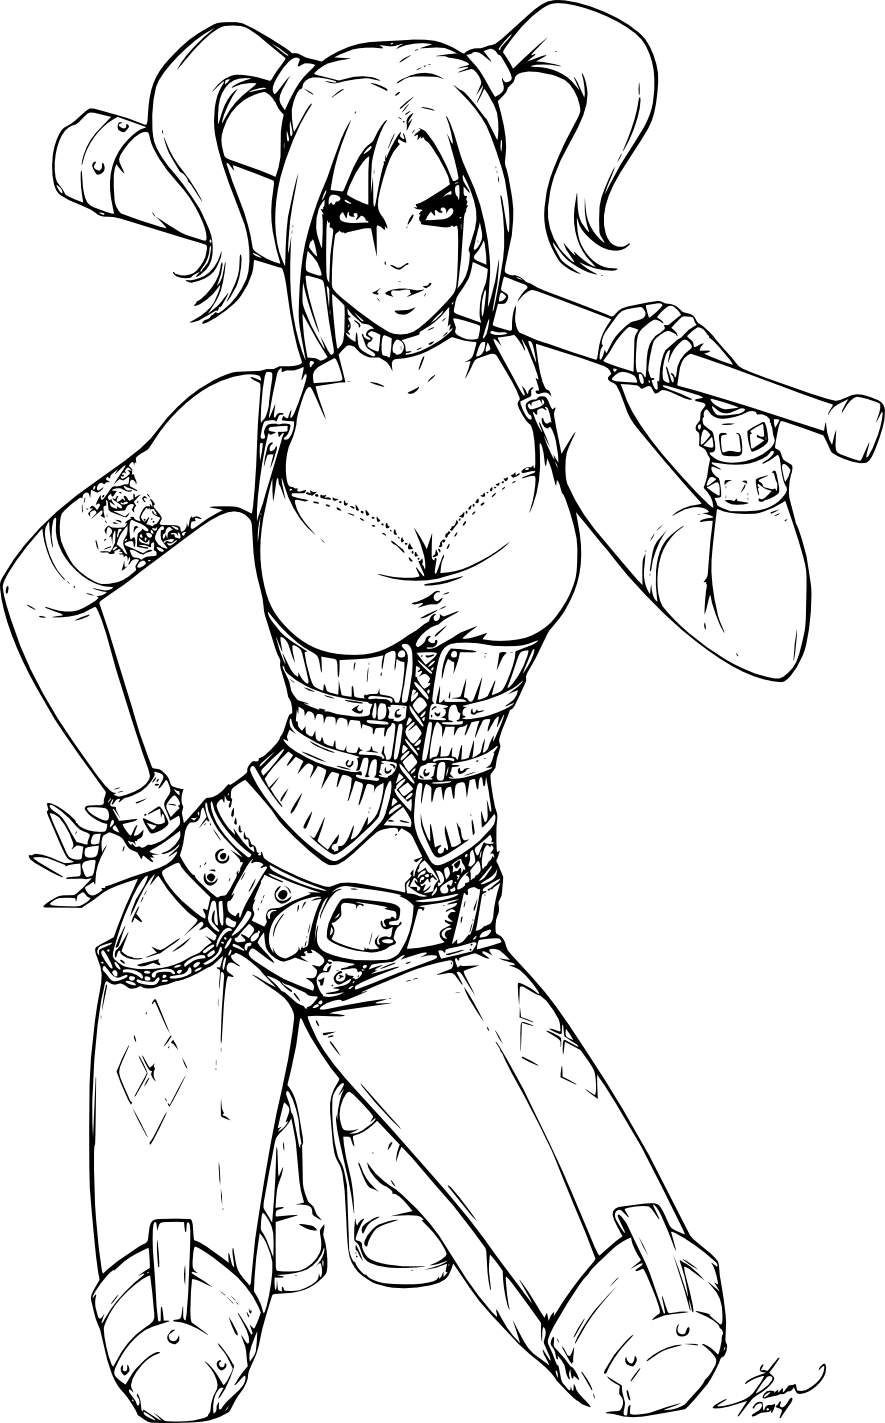 Harley Quinn From Batman coloring page